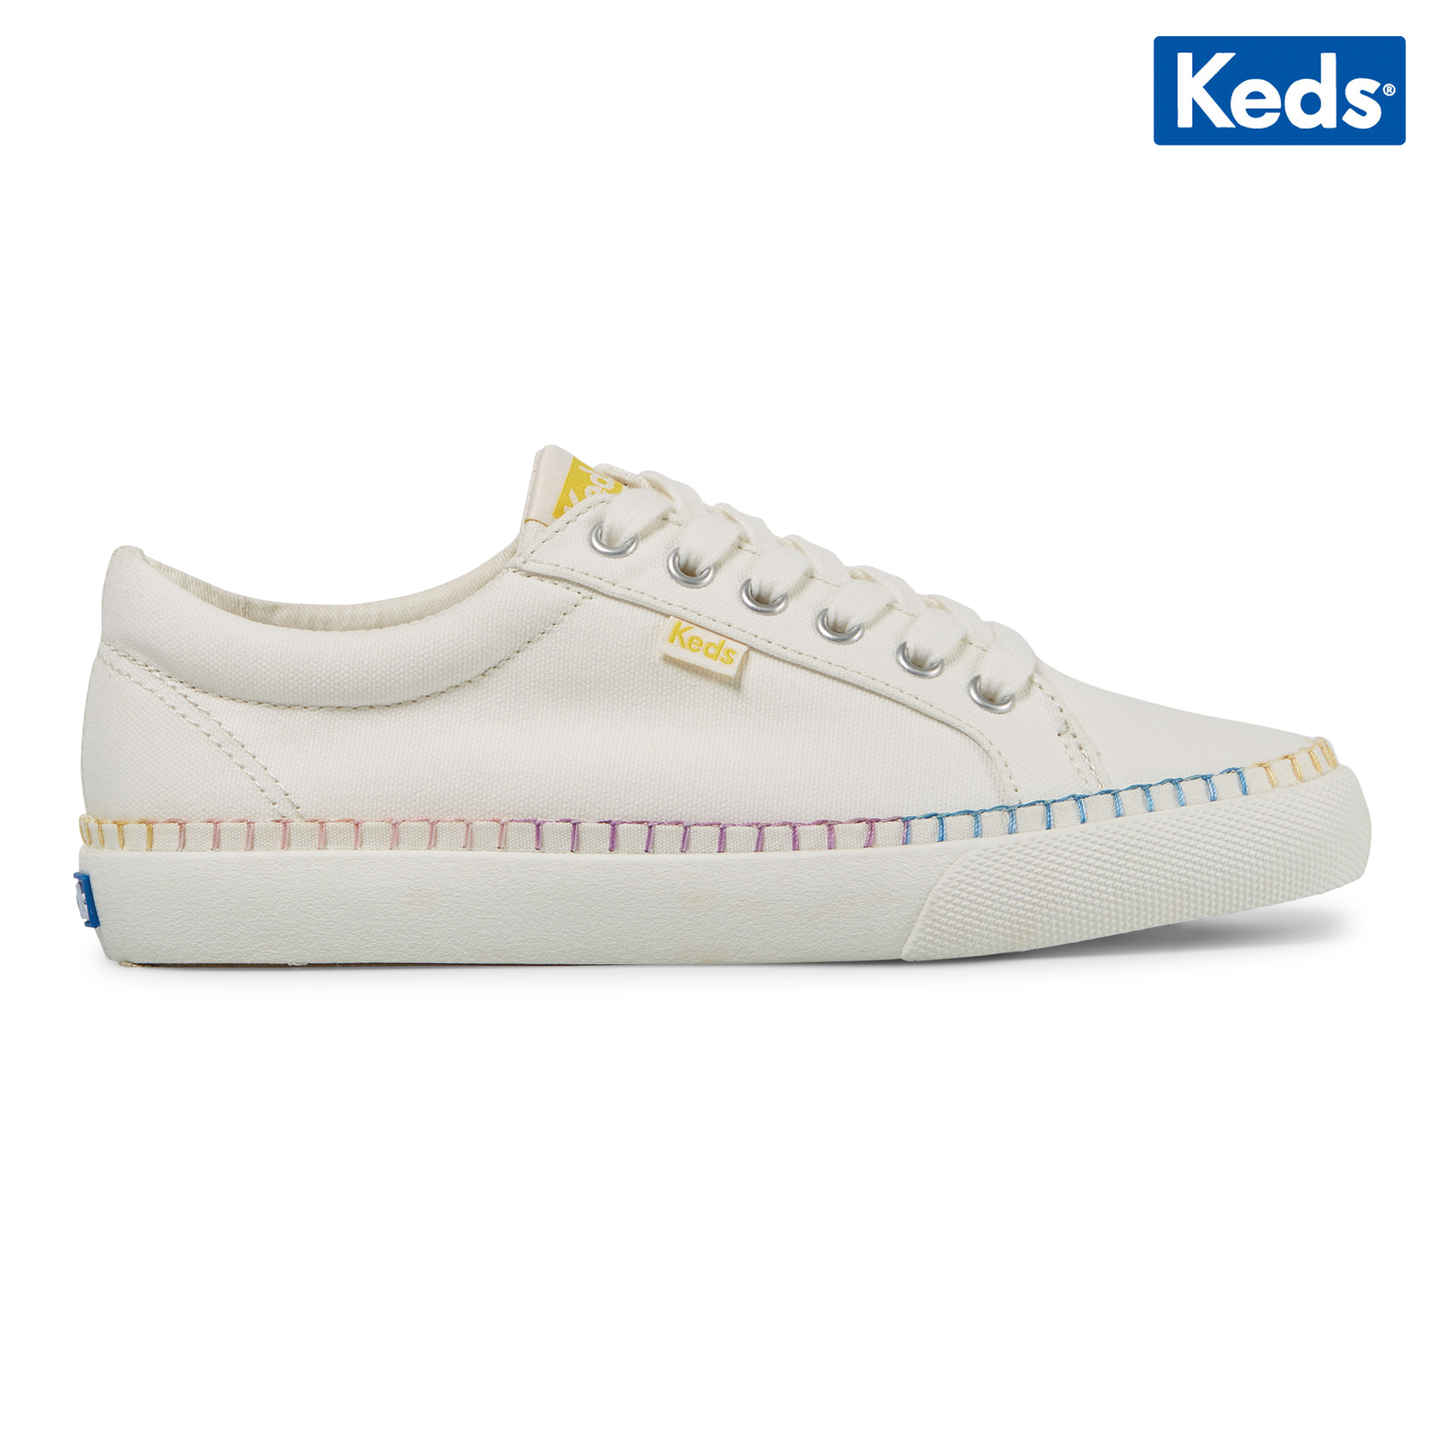 Keds Women's Jump Kick Whipstitch Foxing Canvas Lace Up Sneaker Cream (WF66305) 